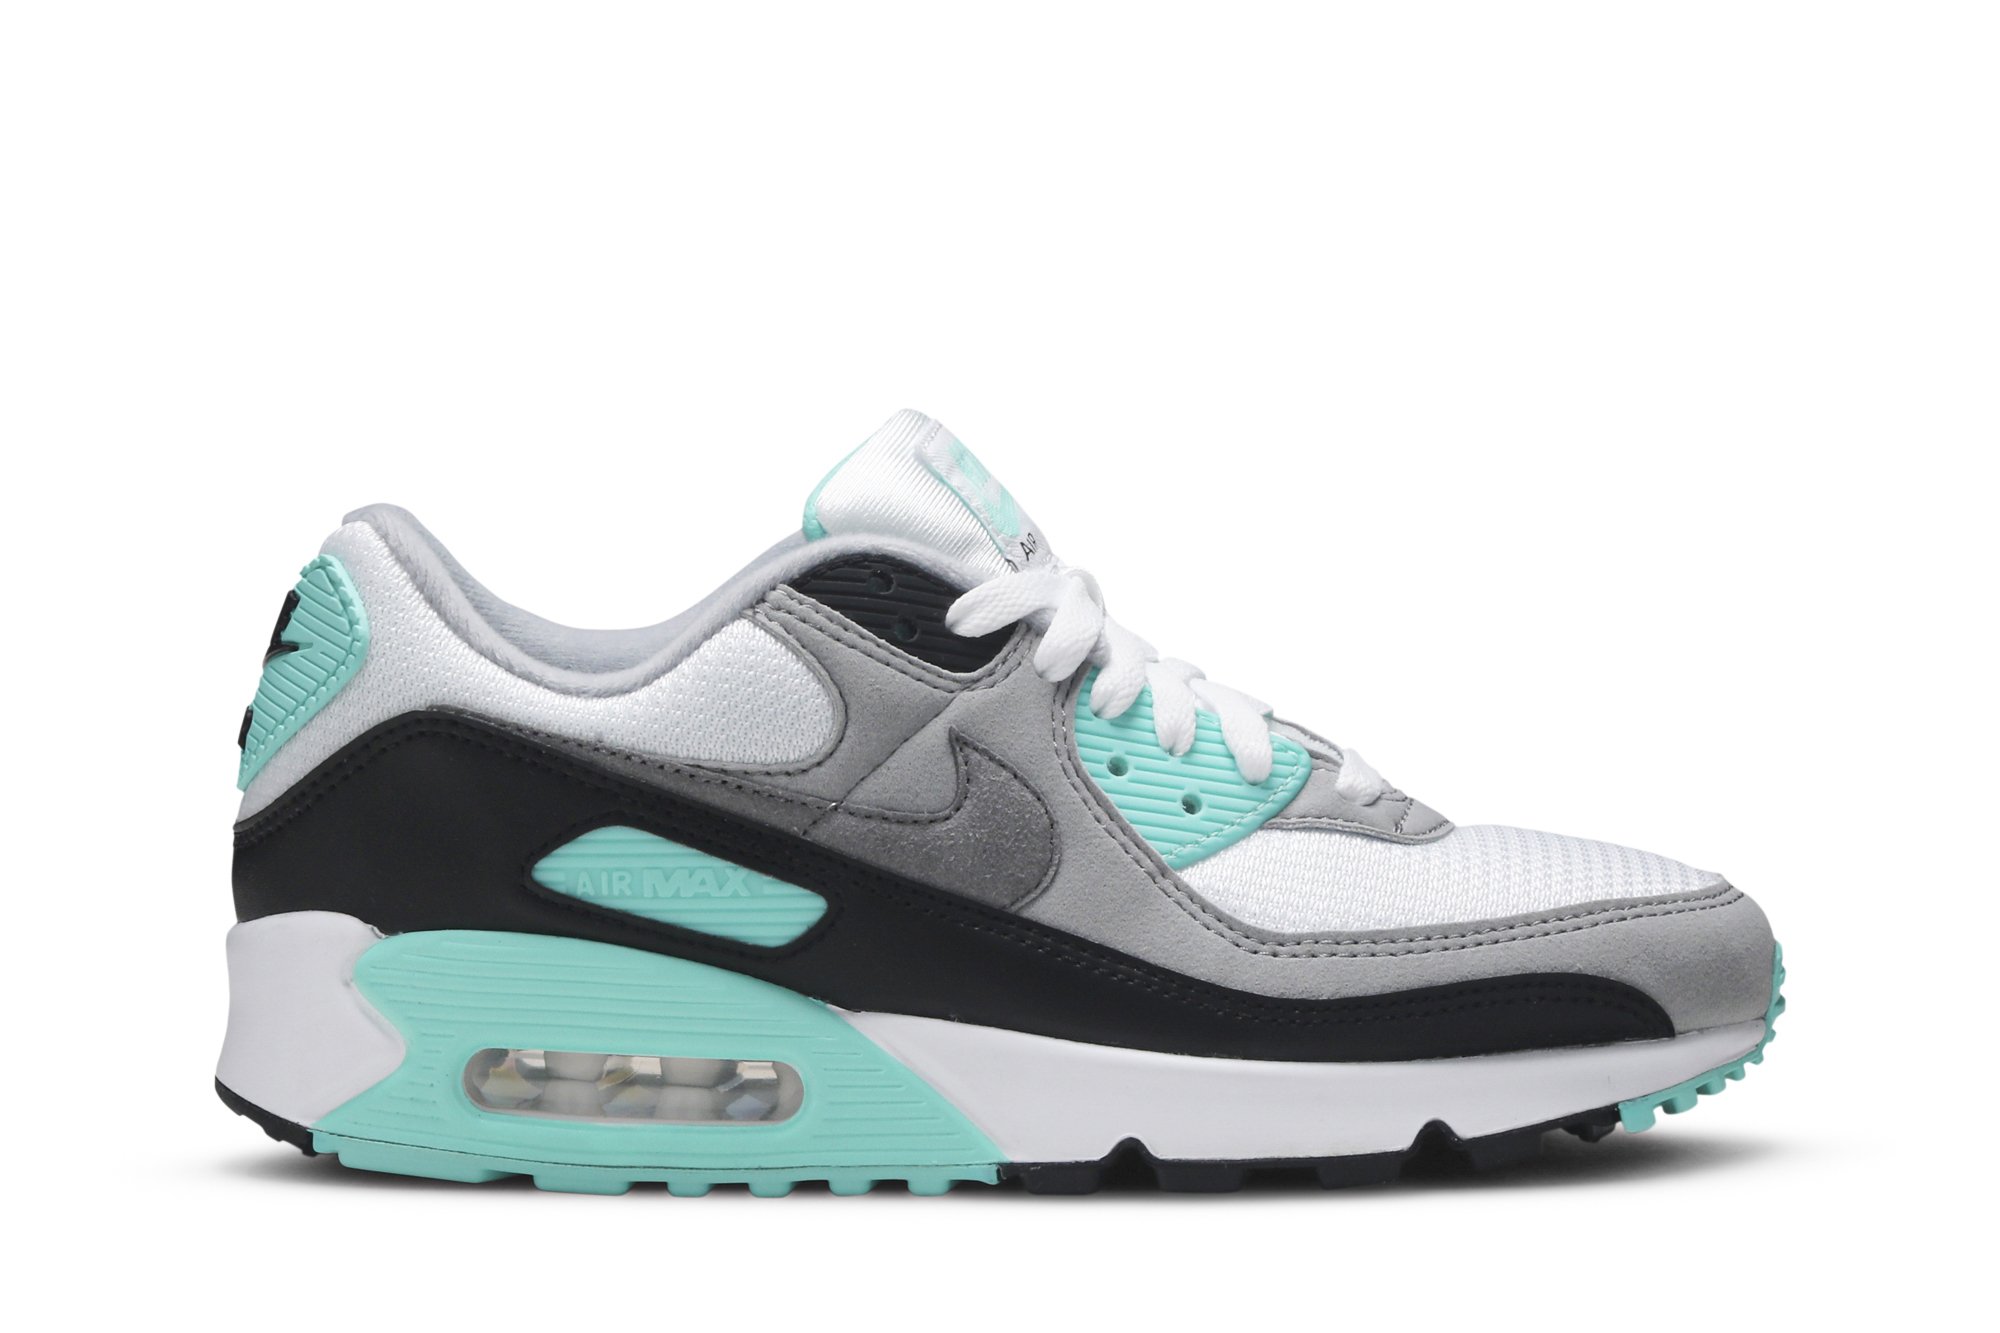 Buy Wmns Air Max 90 'Turquoise' - CD0490 104 | GOAT